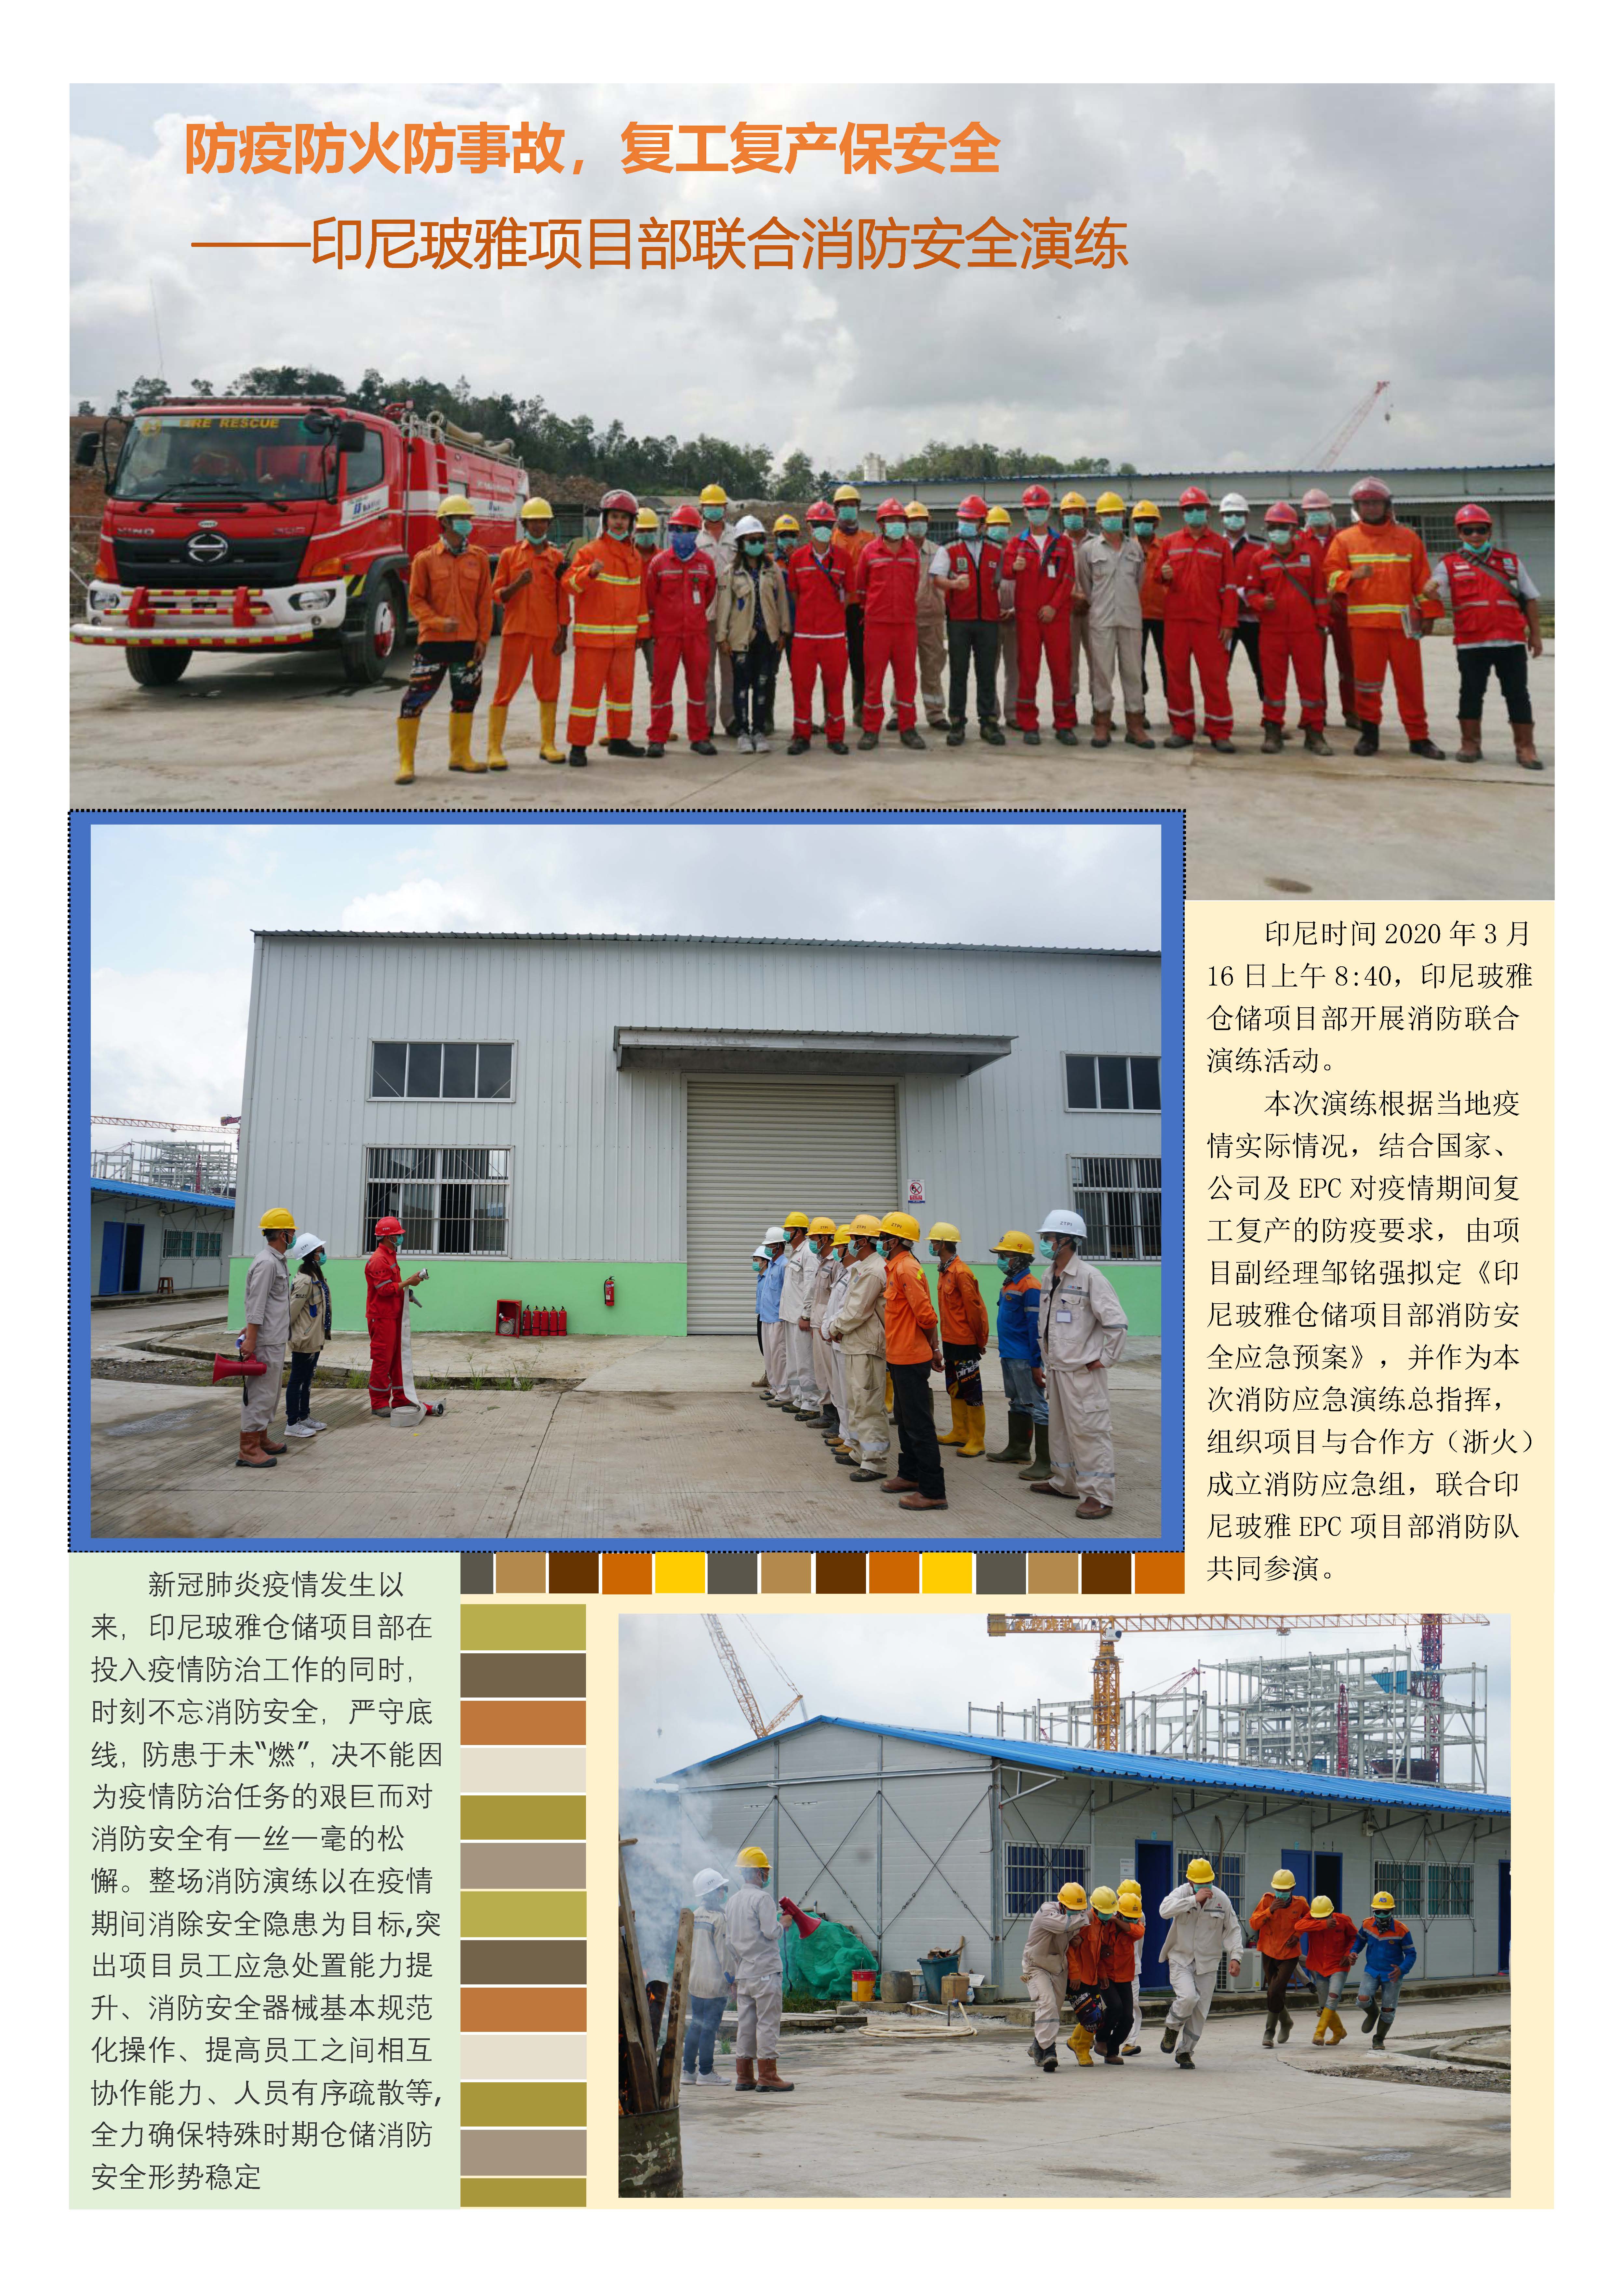 Indonesia Boya Project Department joint fire safety drill